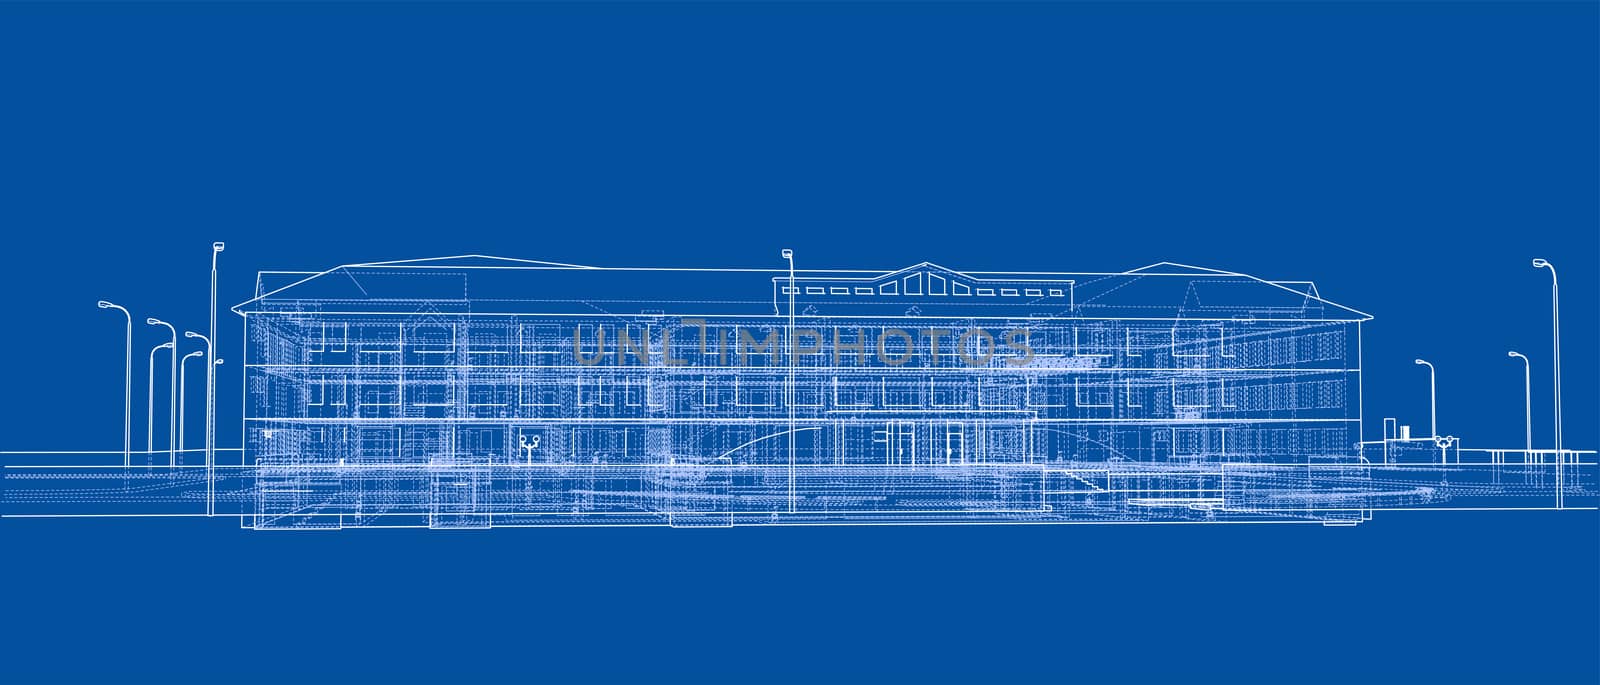 Abstract building on blue background. 3d illustration. Wire-frame style